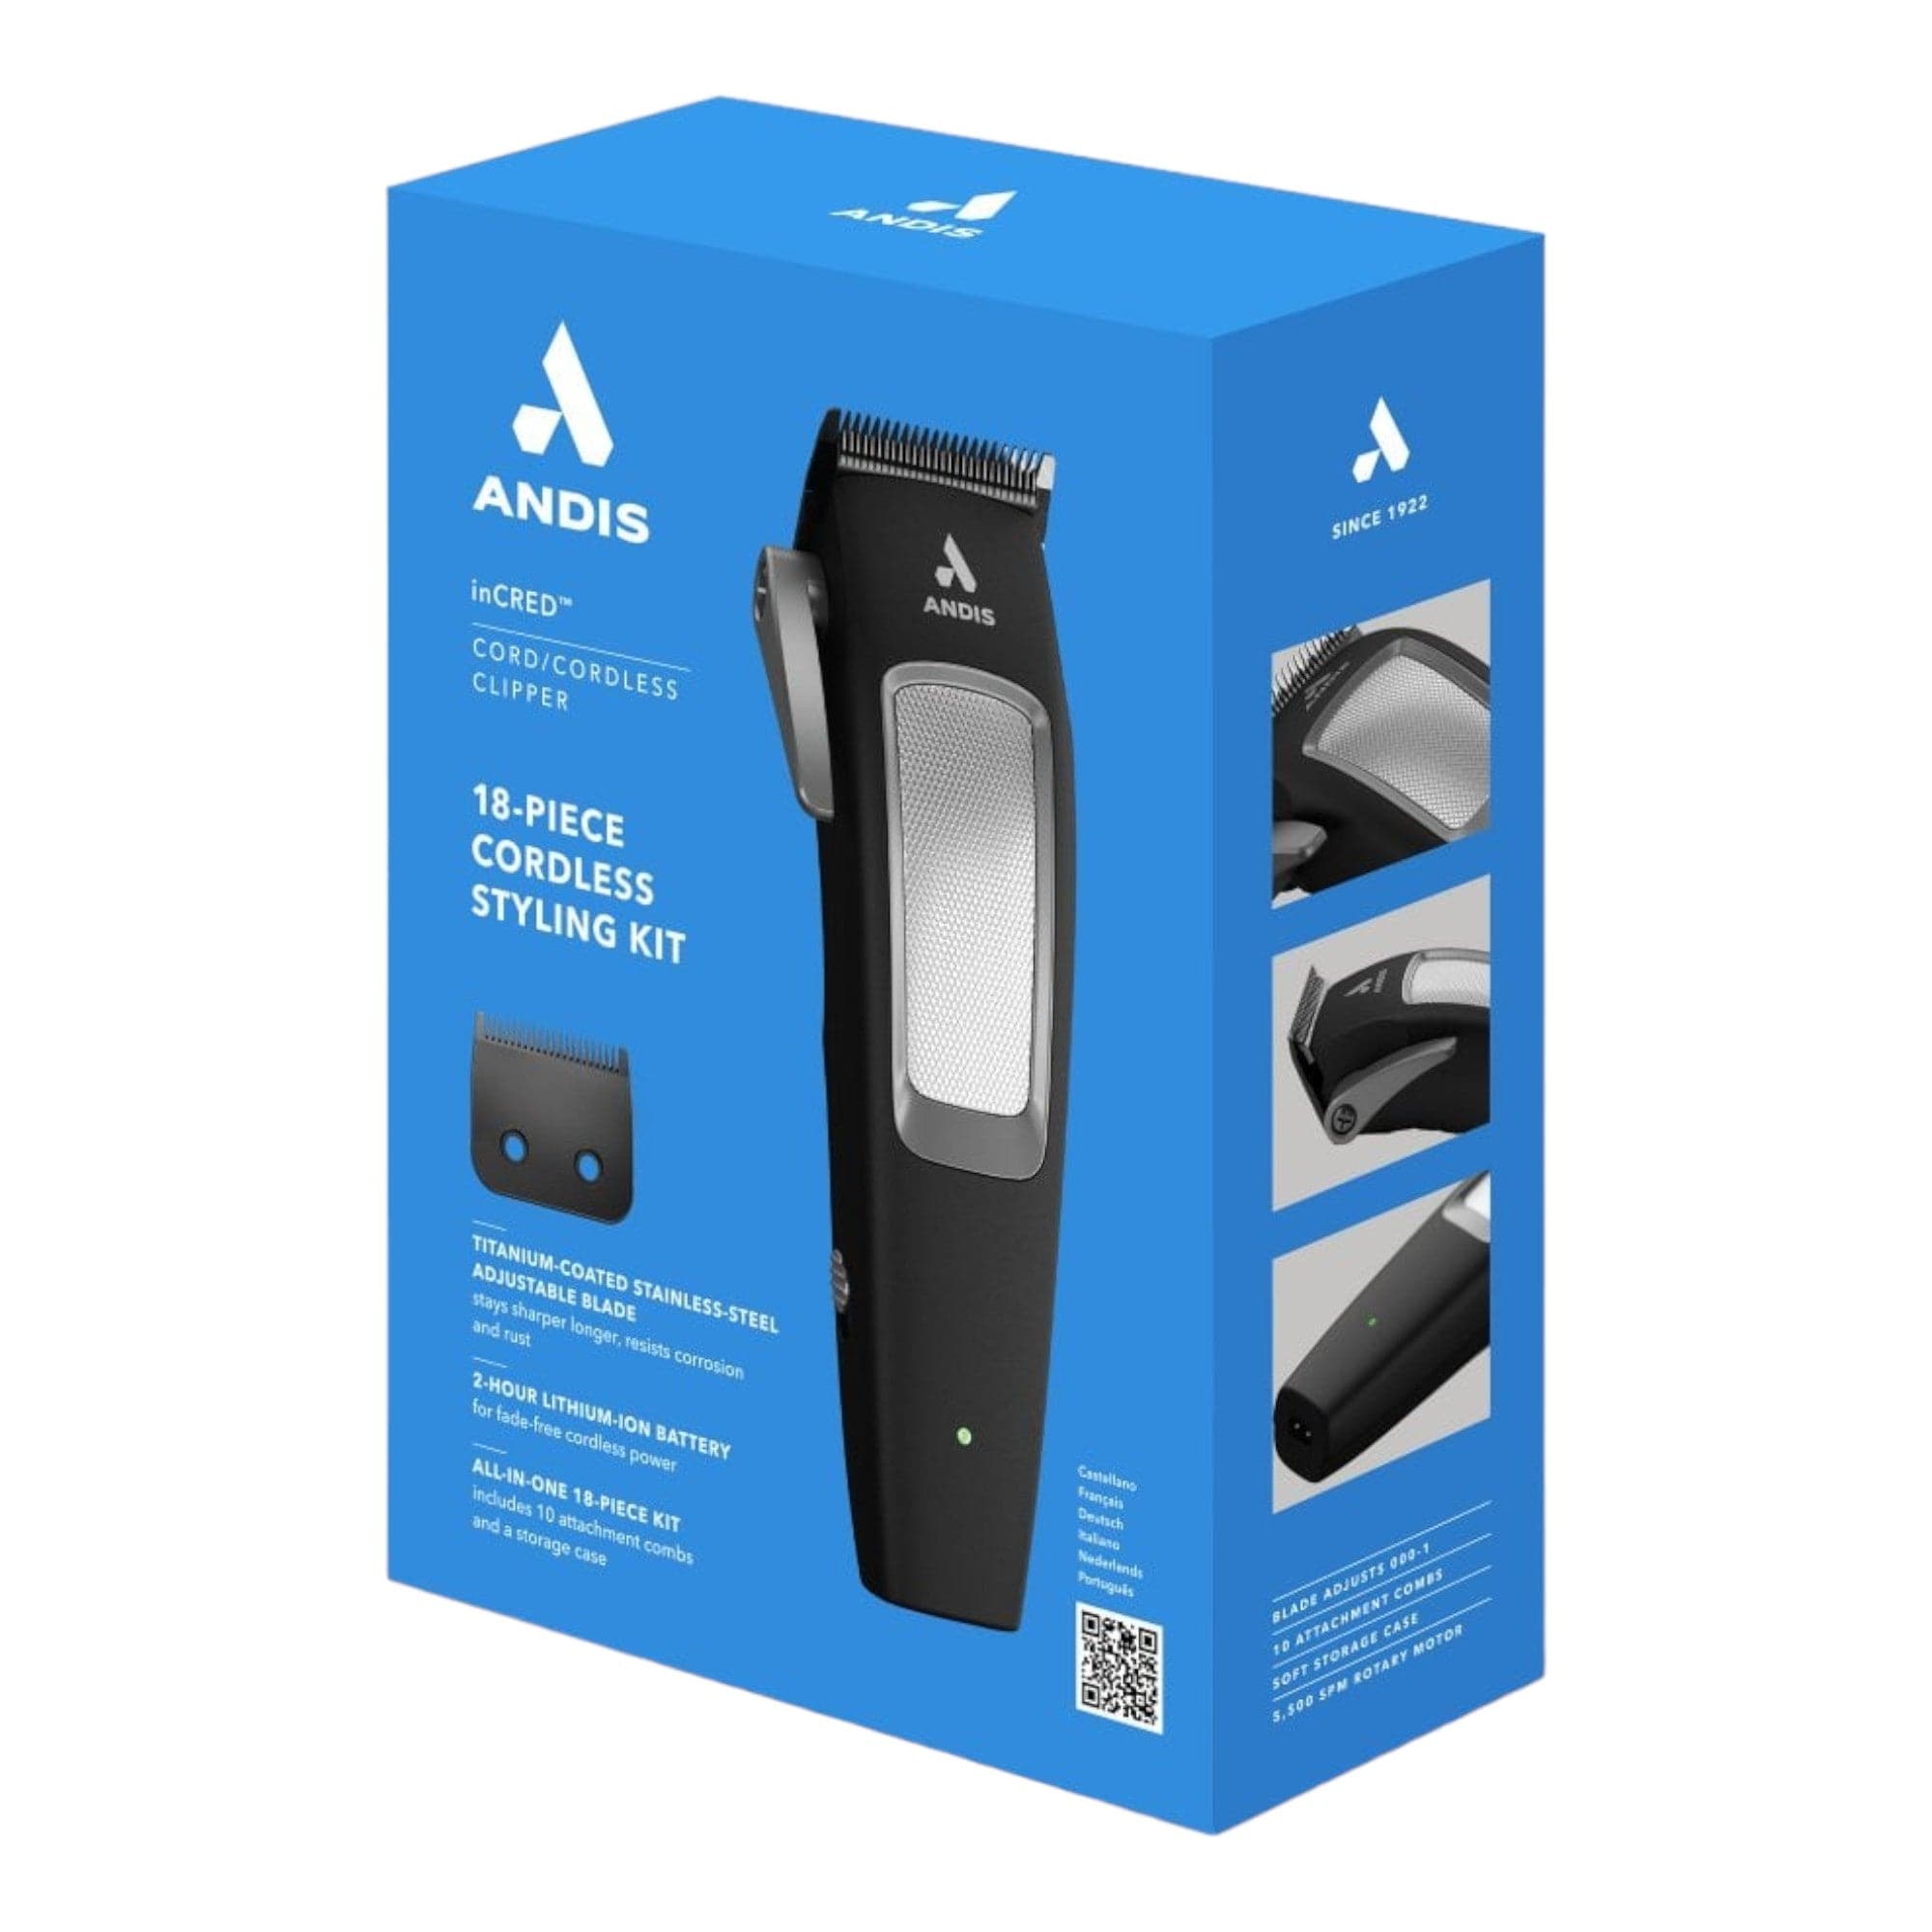 Andis - inCRED Lithium-ion Cordless Clipper CLC-4 560585